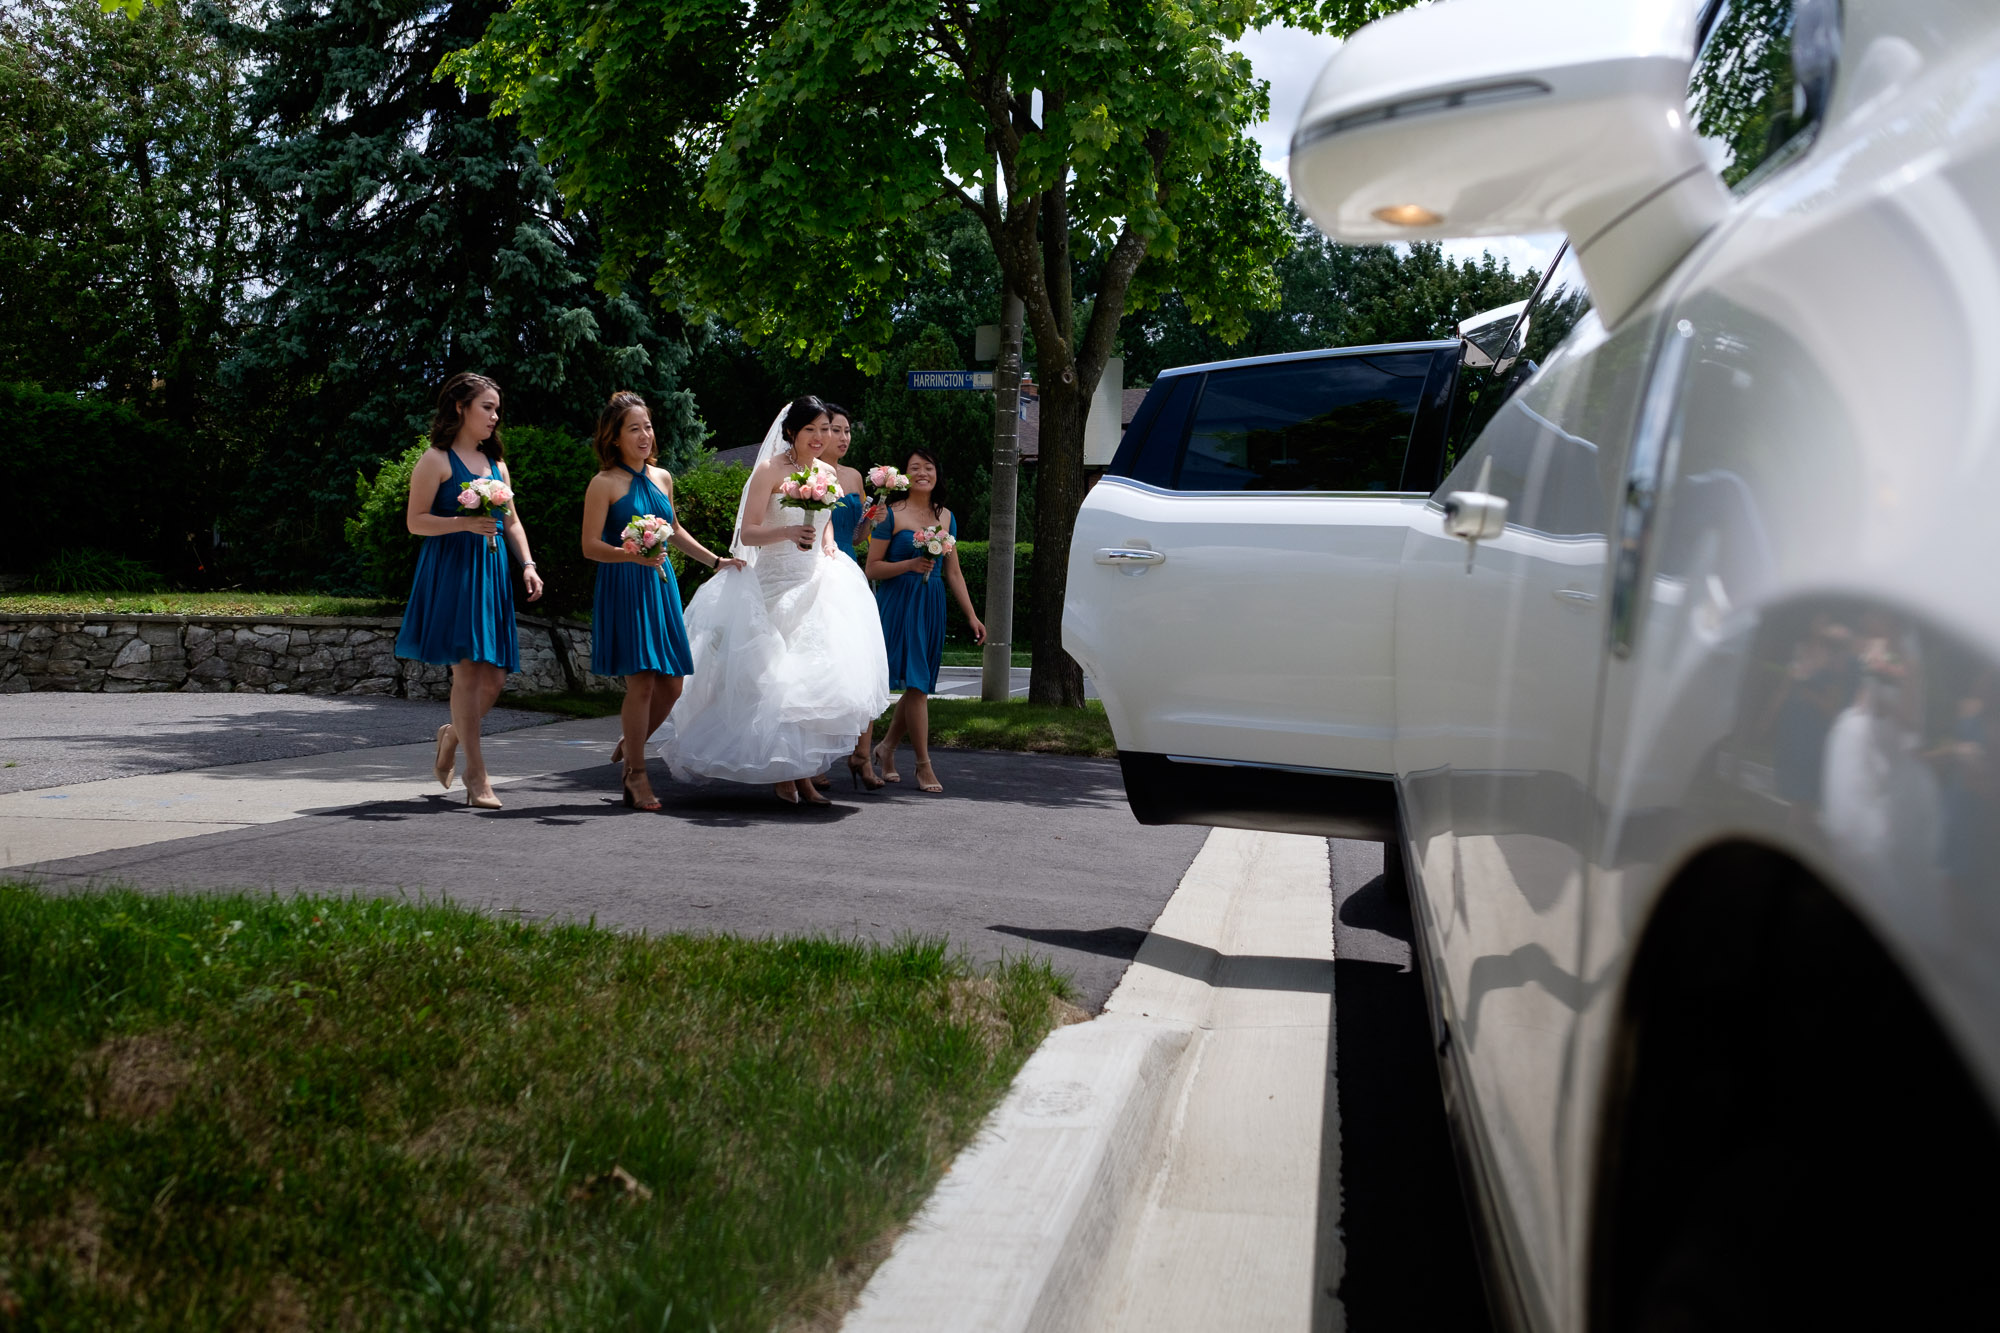  The girls head to the limo to leave for their Roman Catholic wedding ceremony in Toronto.  